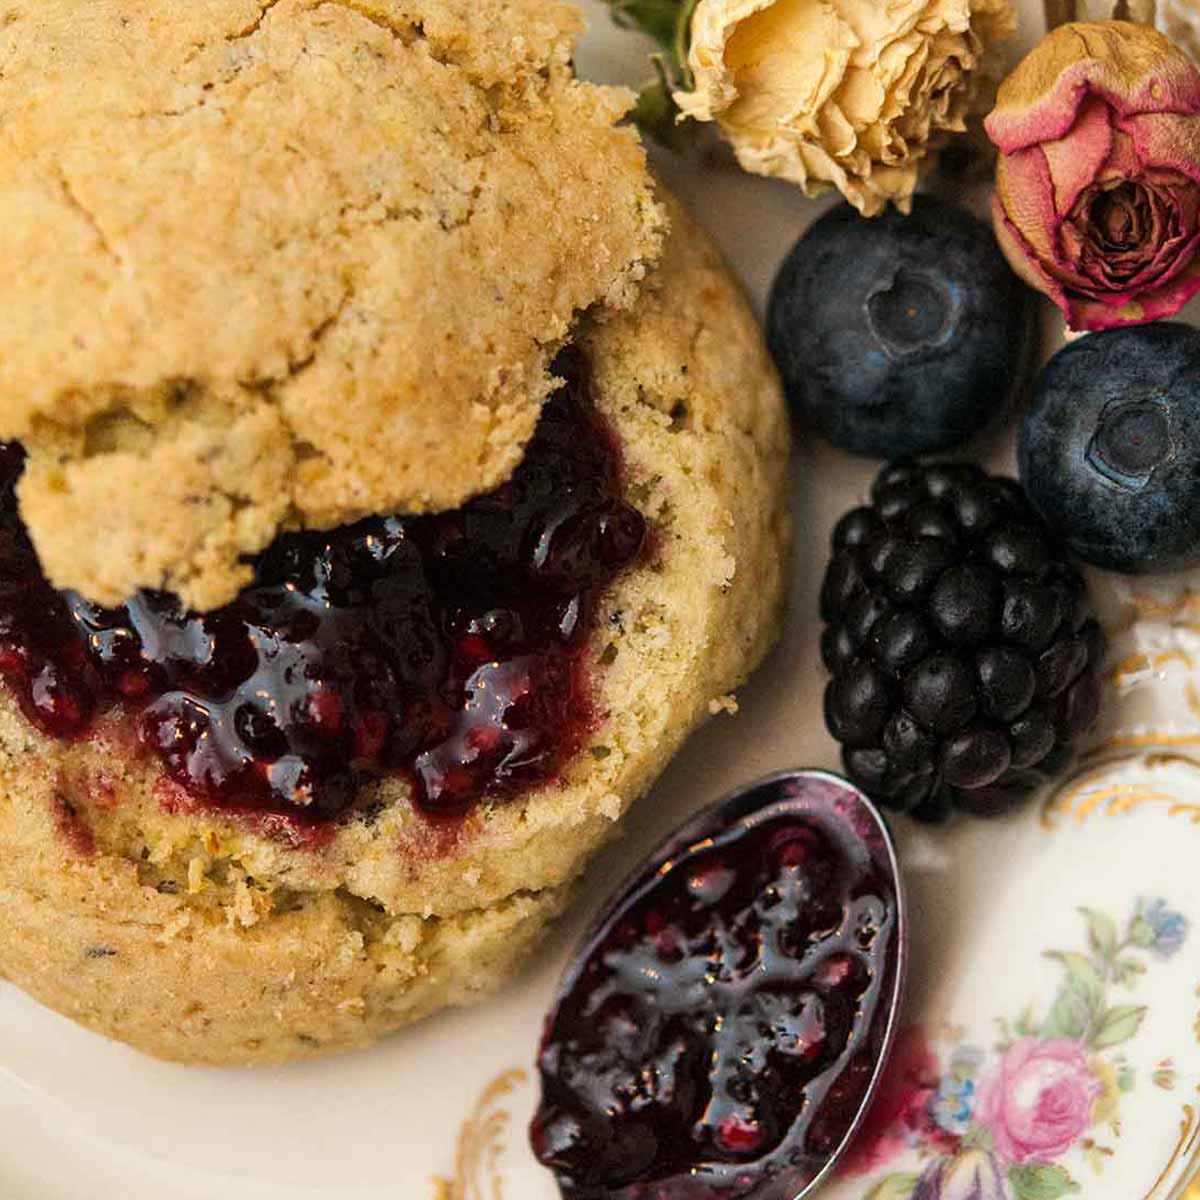 A scone with jam on a decorative plate next to a spoon with jam, a few berries and a few dry roses.